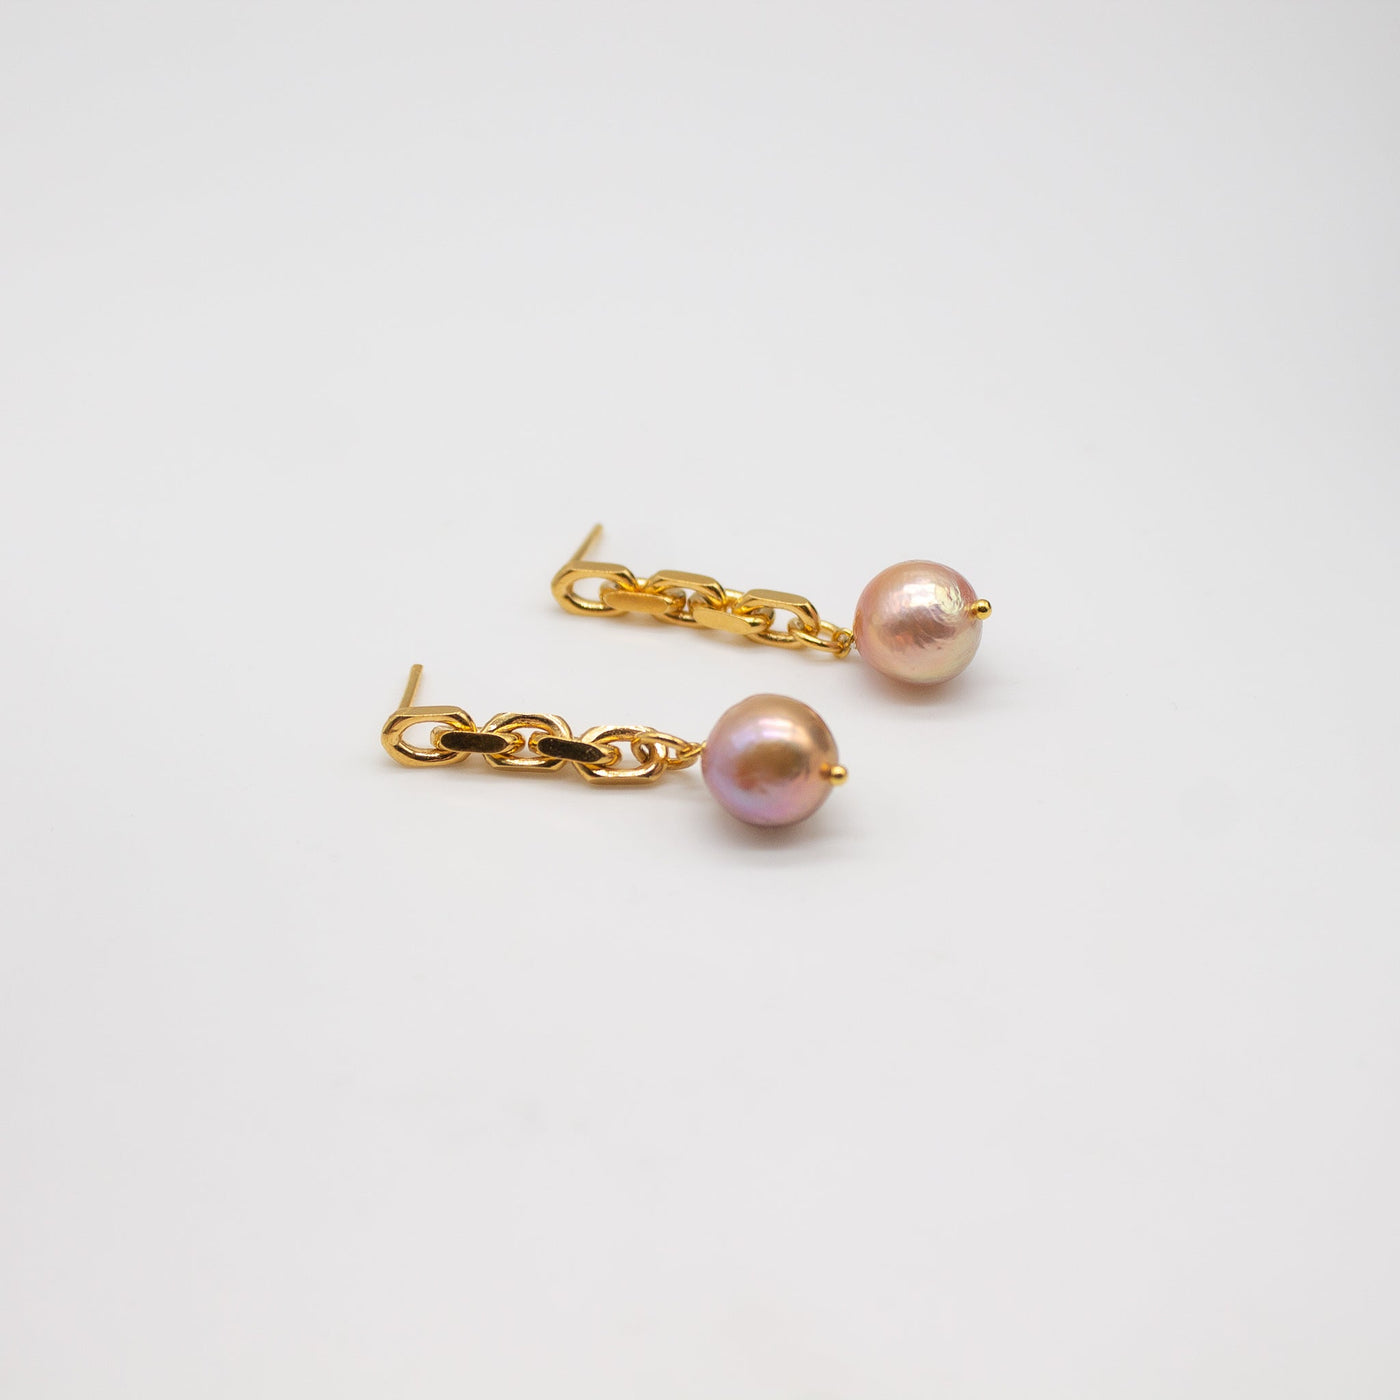 Bridal jewelery LYSEFJORD // Statement chain earrings gold-plated with rare Edison pearls